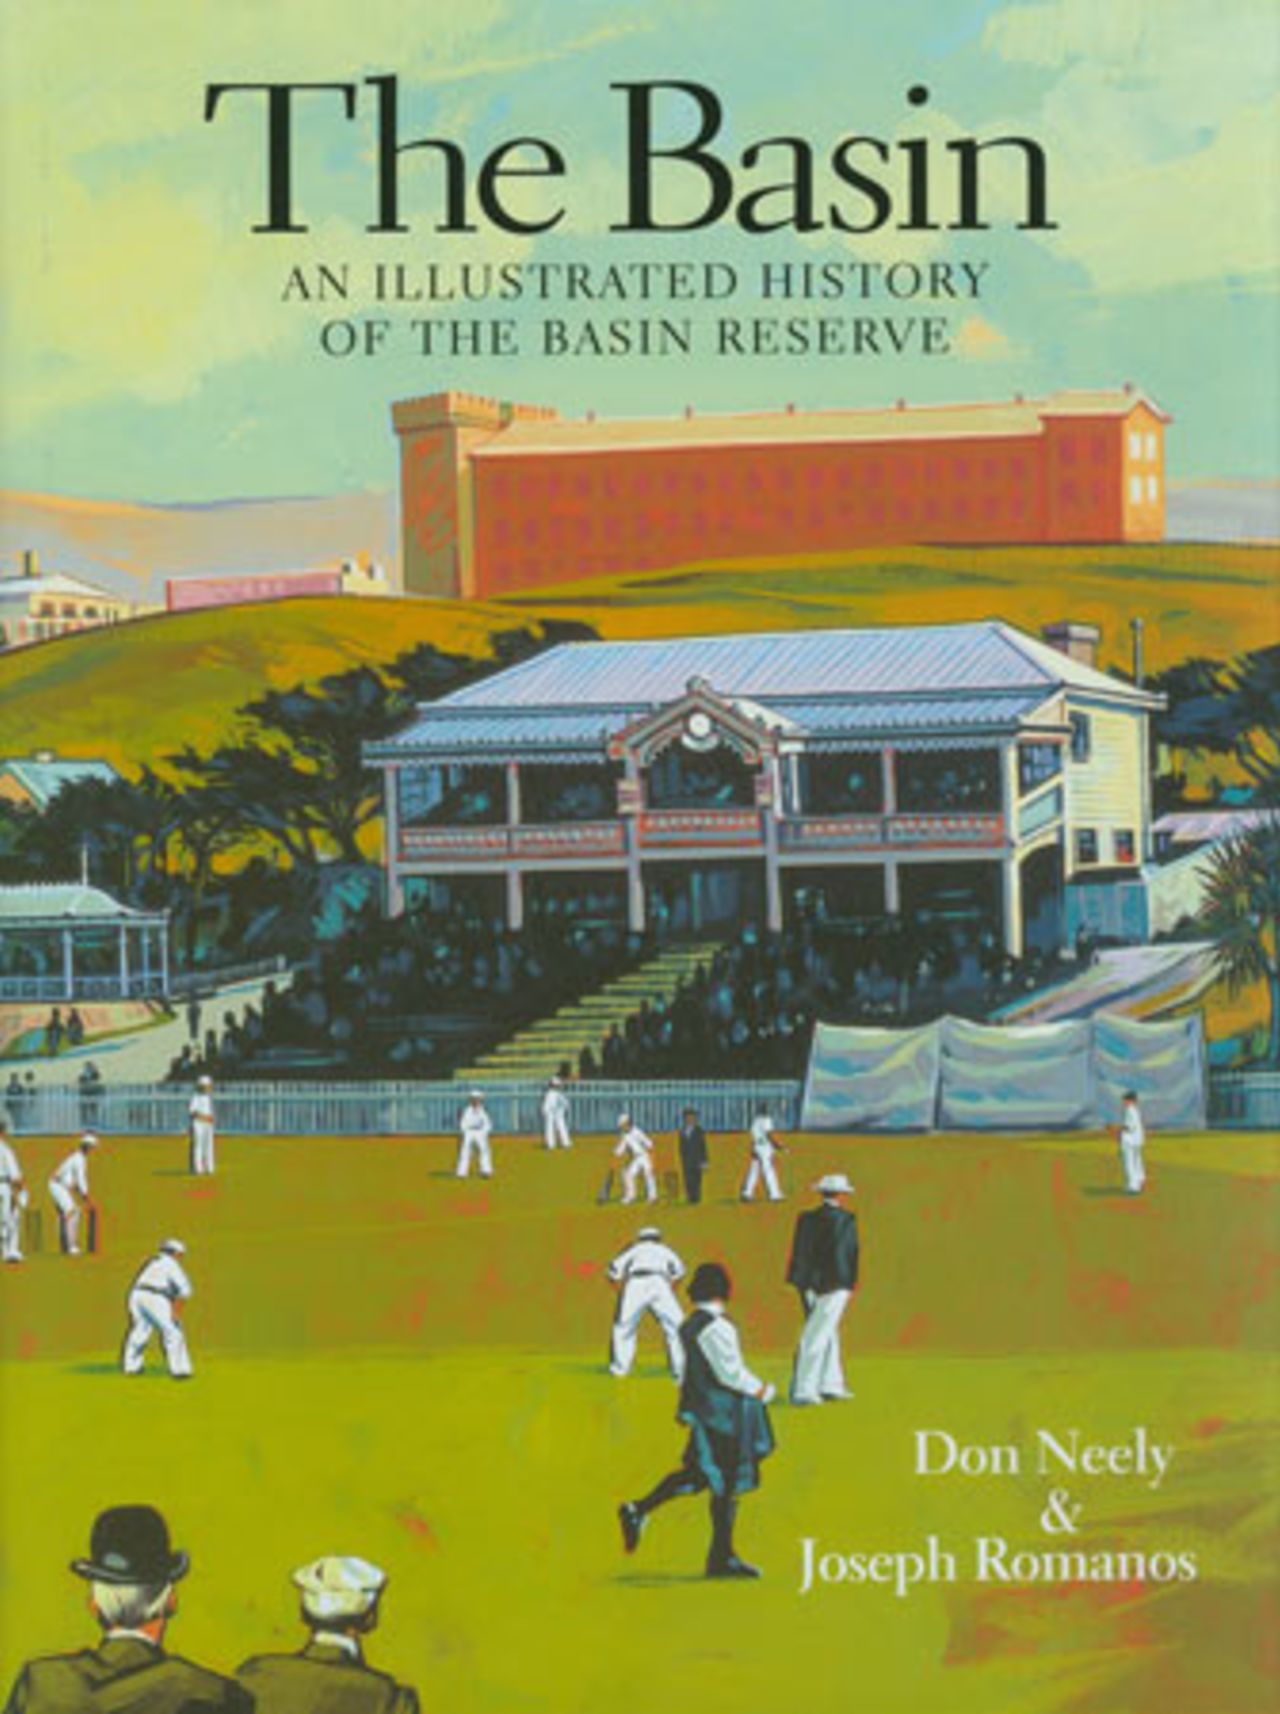 Cover of book 'The Basin - An illustrated history of the Basin Reserve' by Don Neely and Joseph Romanos.